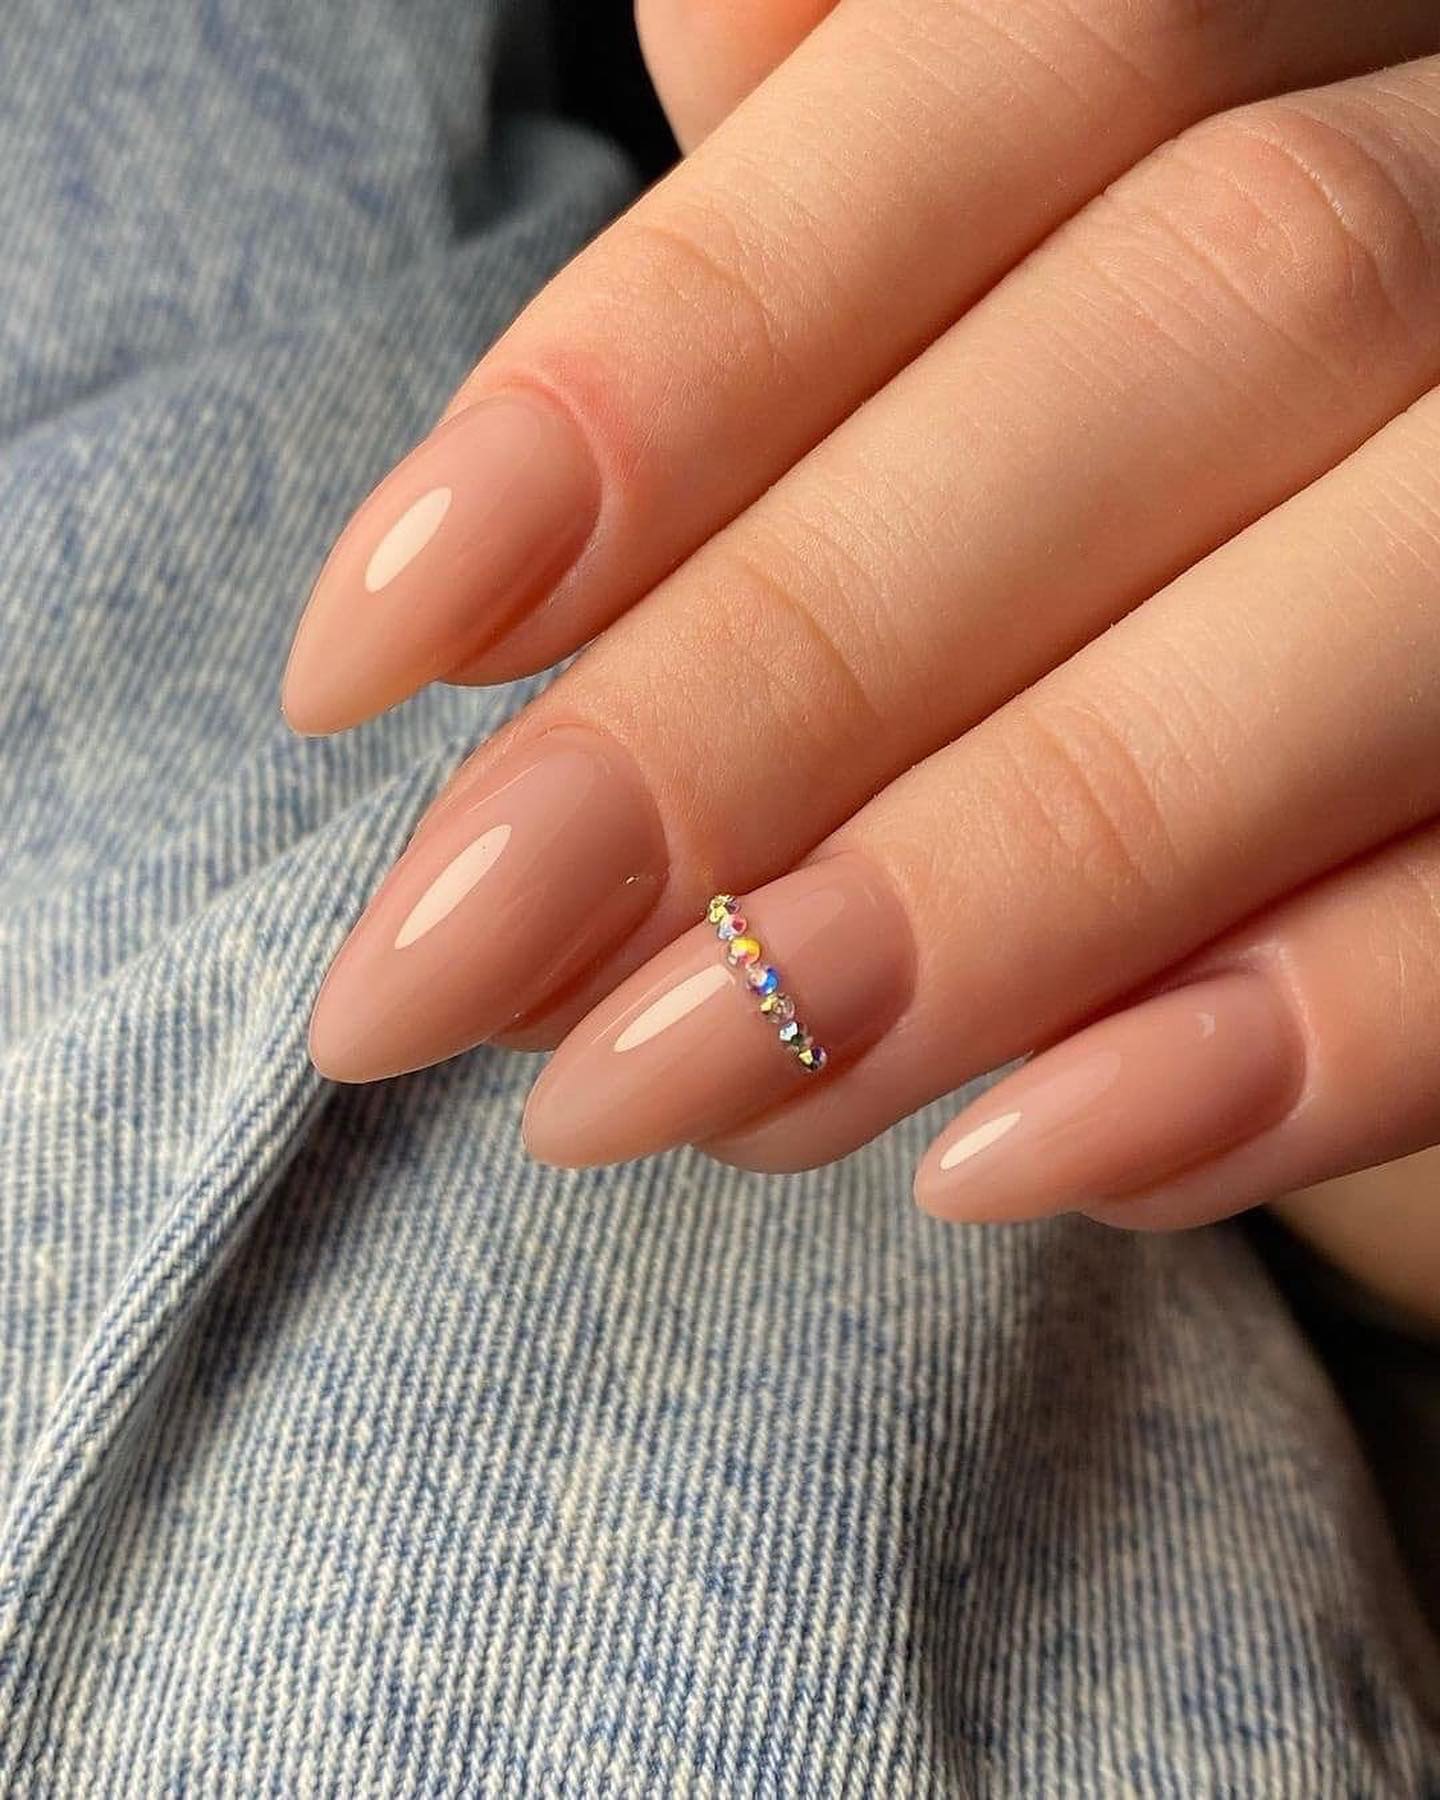 100 Of The Best Spring Inspired Nail Designs images 39